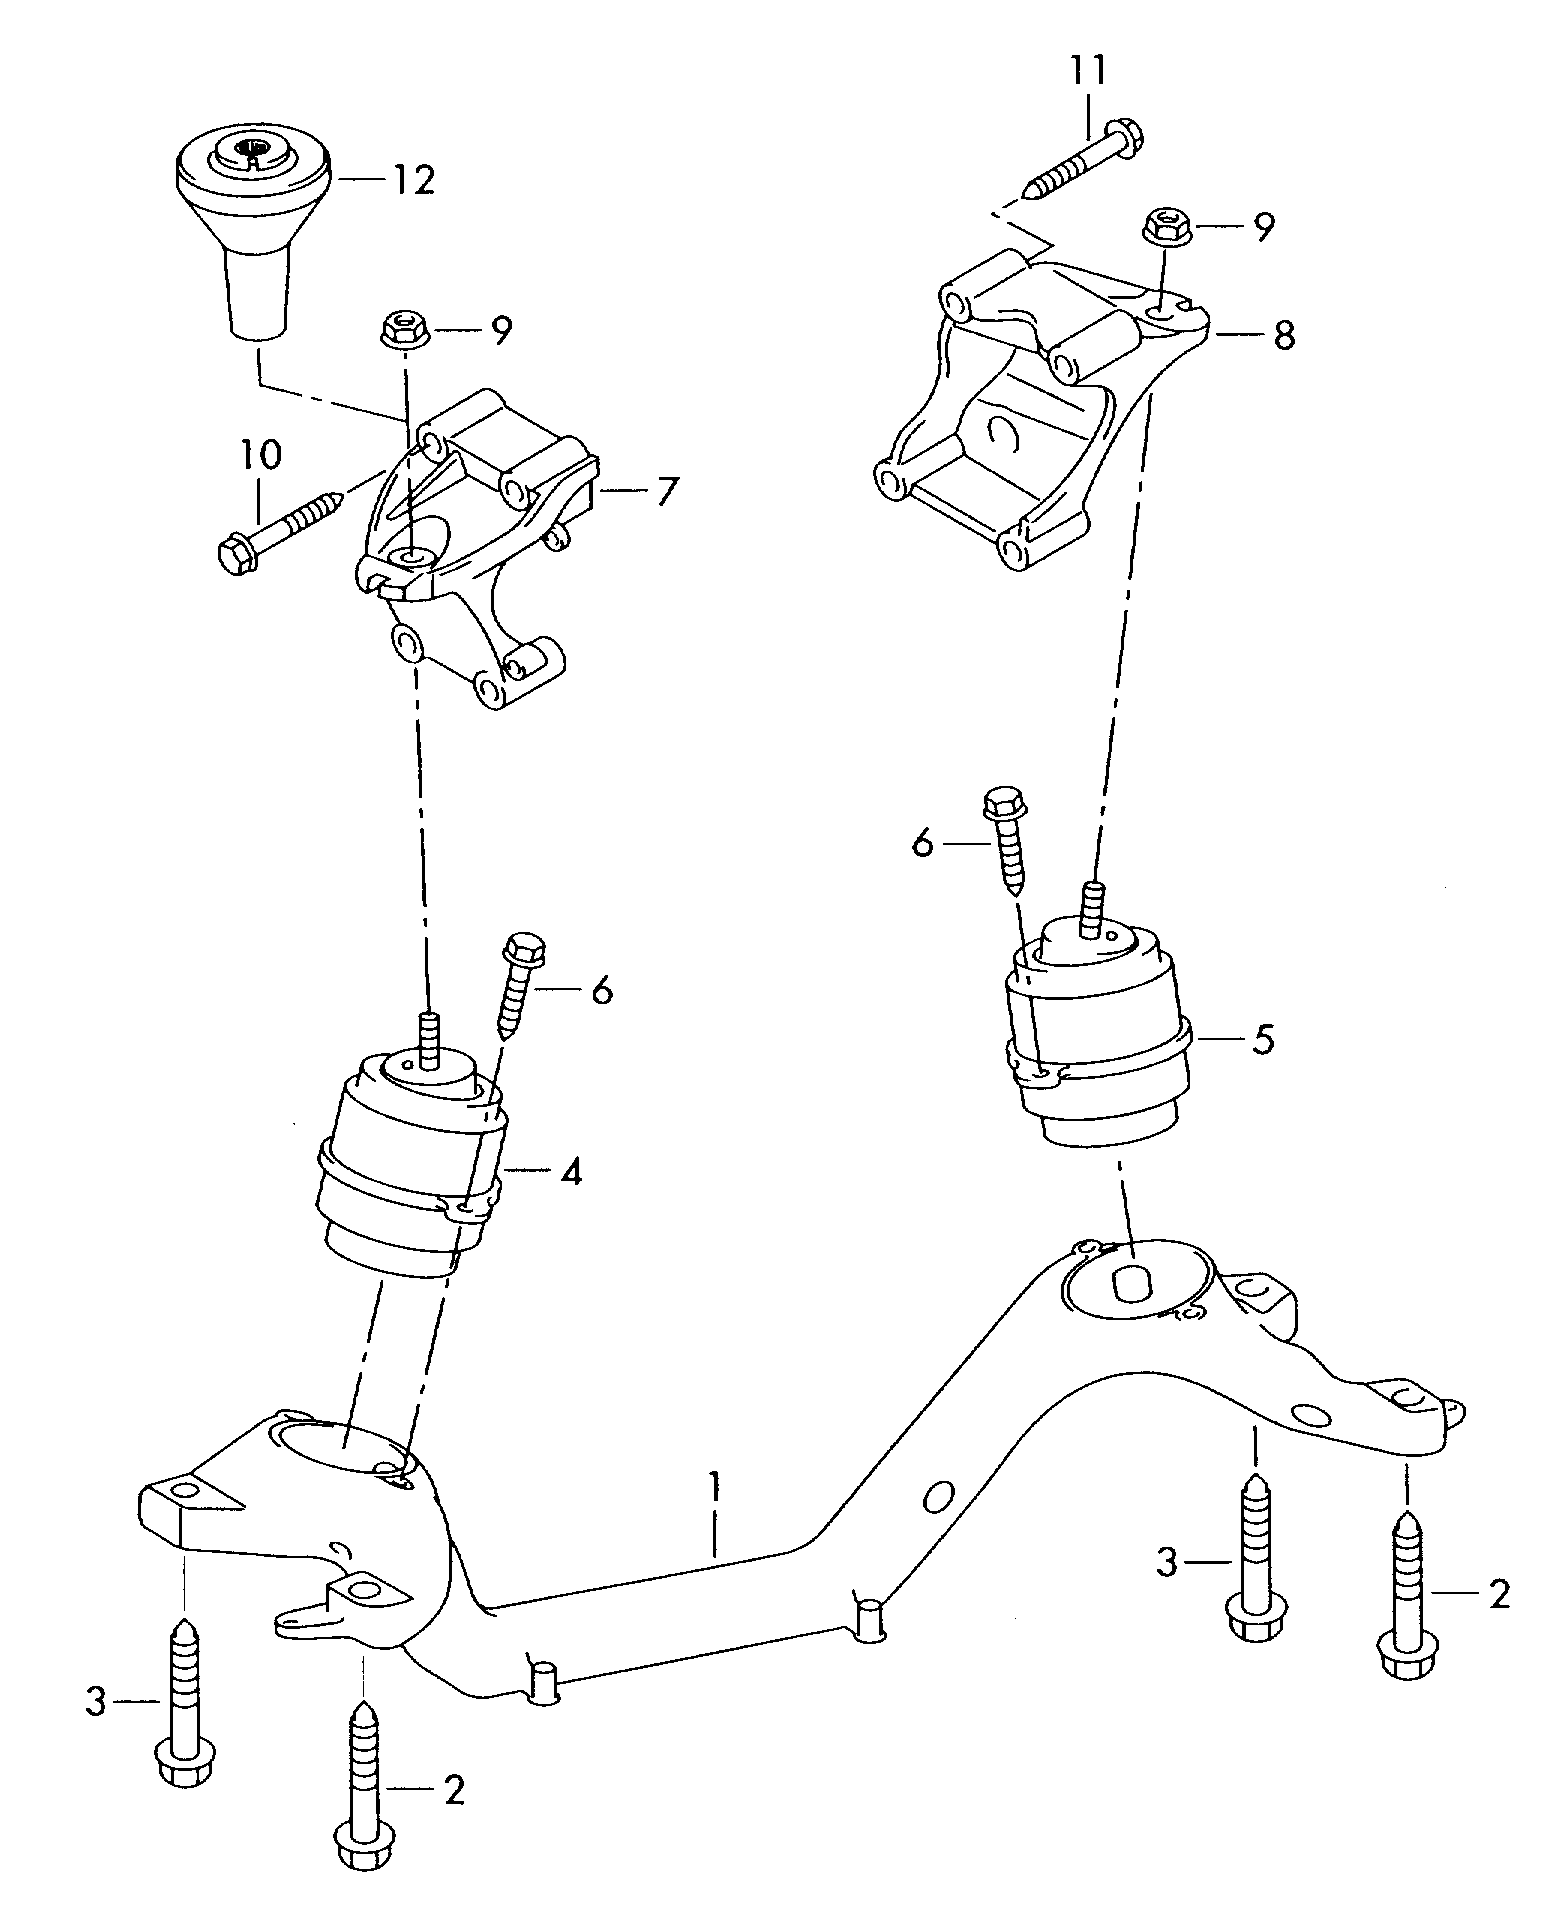 mounting parts for engine and
transmission - Touareg(TOUA)  